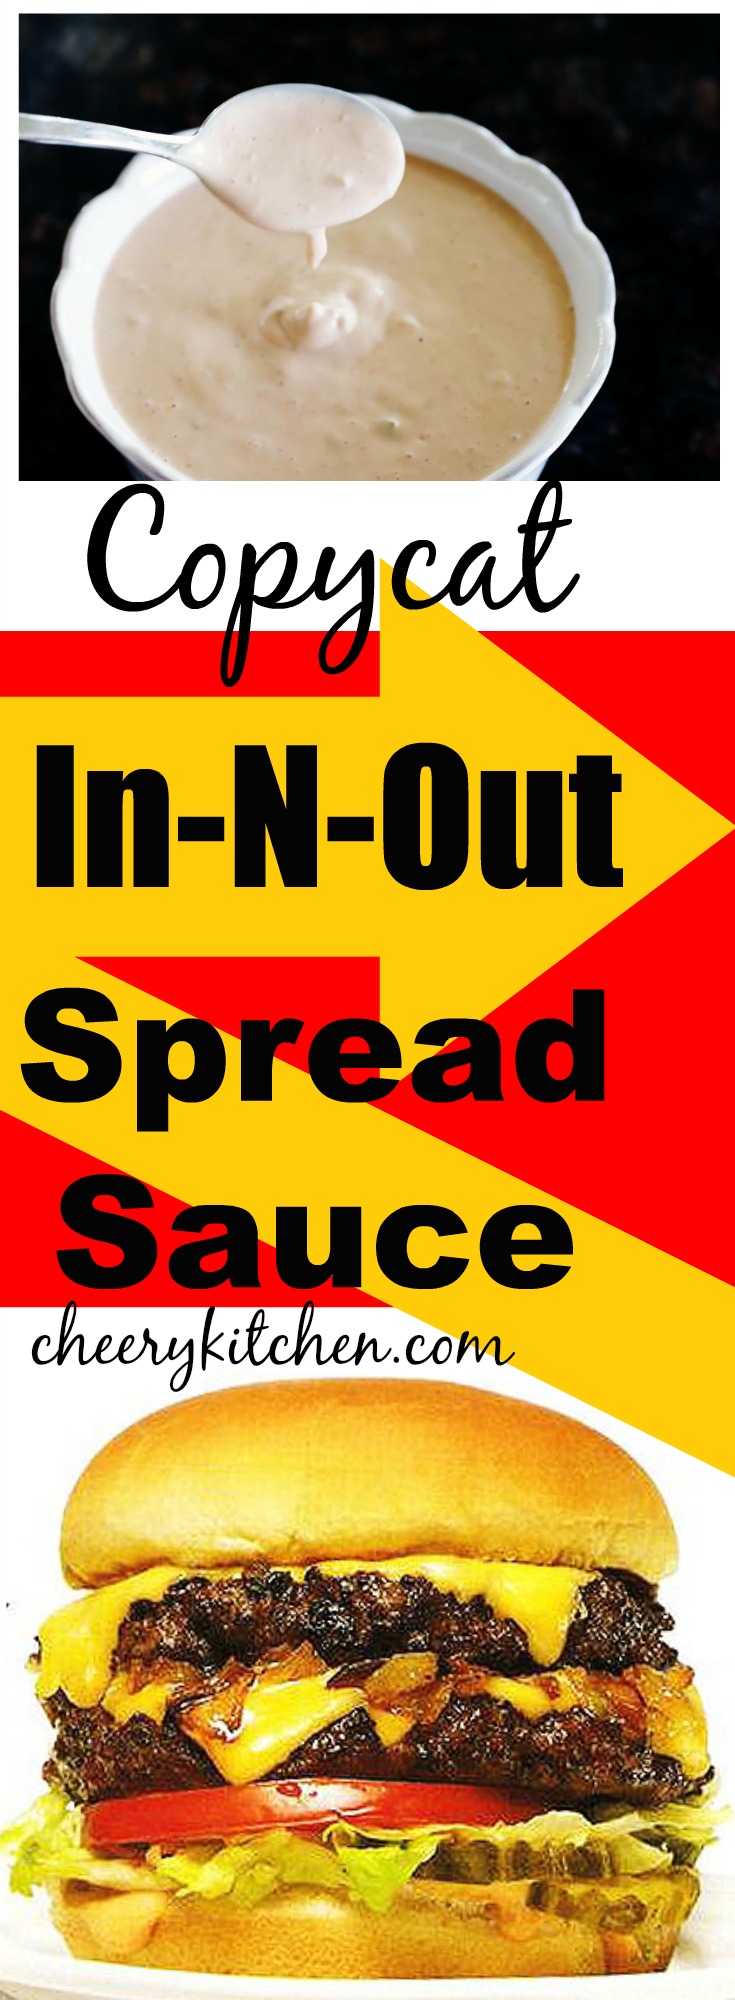 Make your fries and burgers amazing with our Copycat In-N-Out Spread Sauce. Serve it all double-double and animal style!